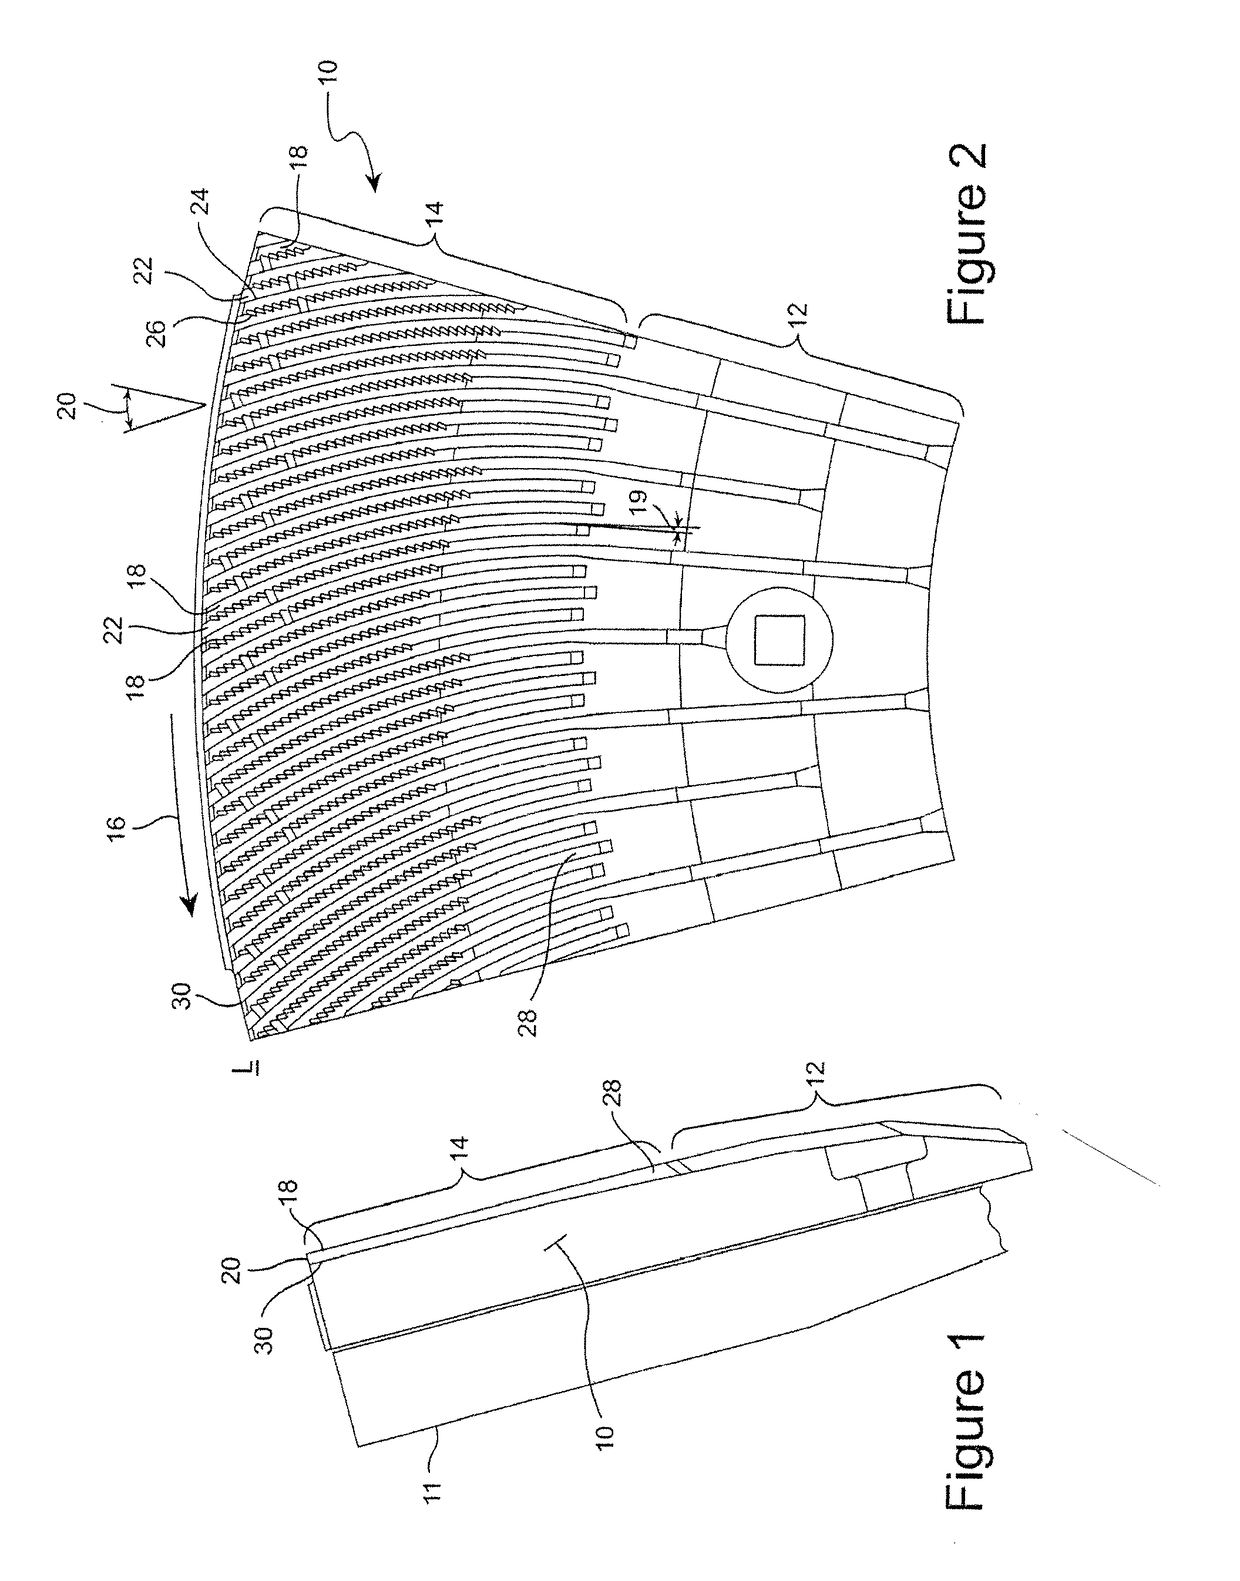 Rotor refiner plate element for counter-rotating refiner having curved bars and serrated leading edges